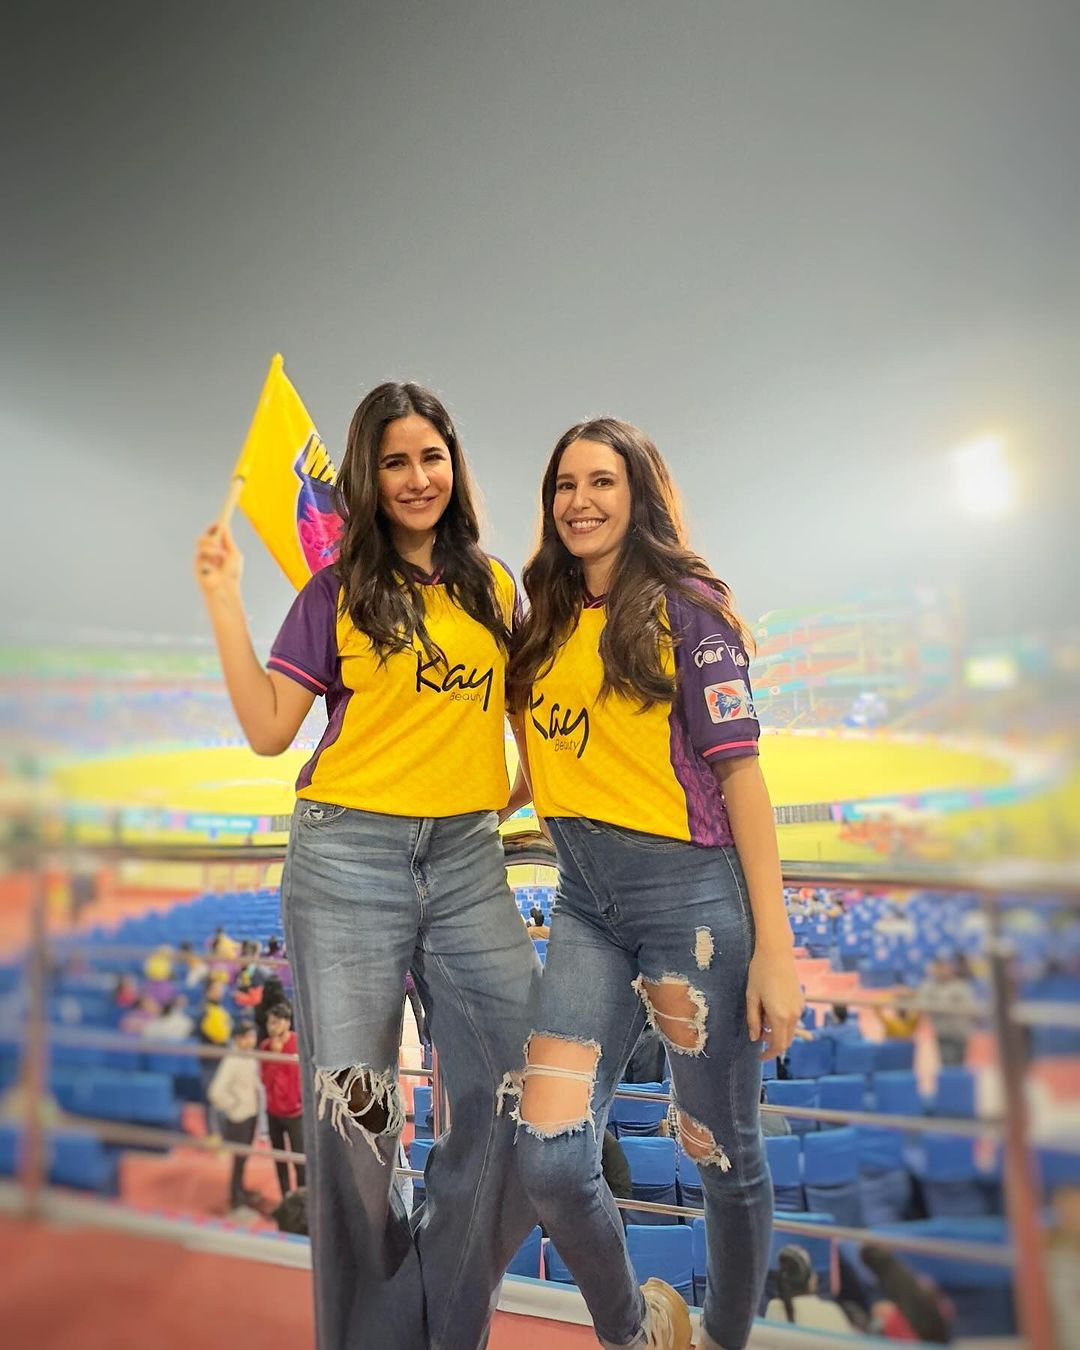 Katrina Kaif lights up the pitch with her surprise appearance at Women's  Premier League